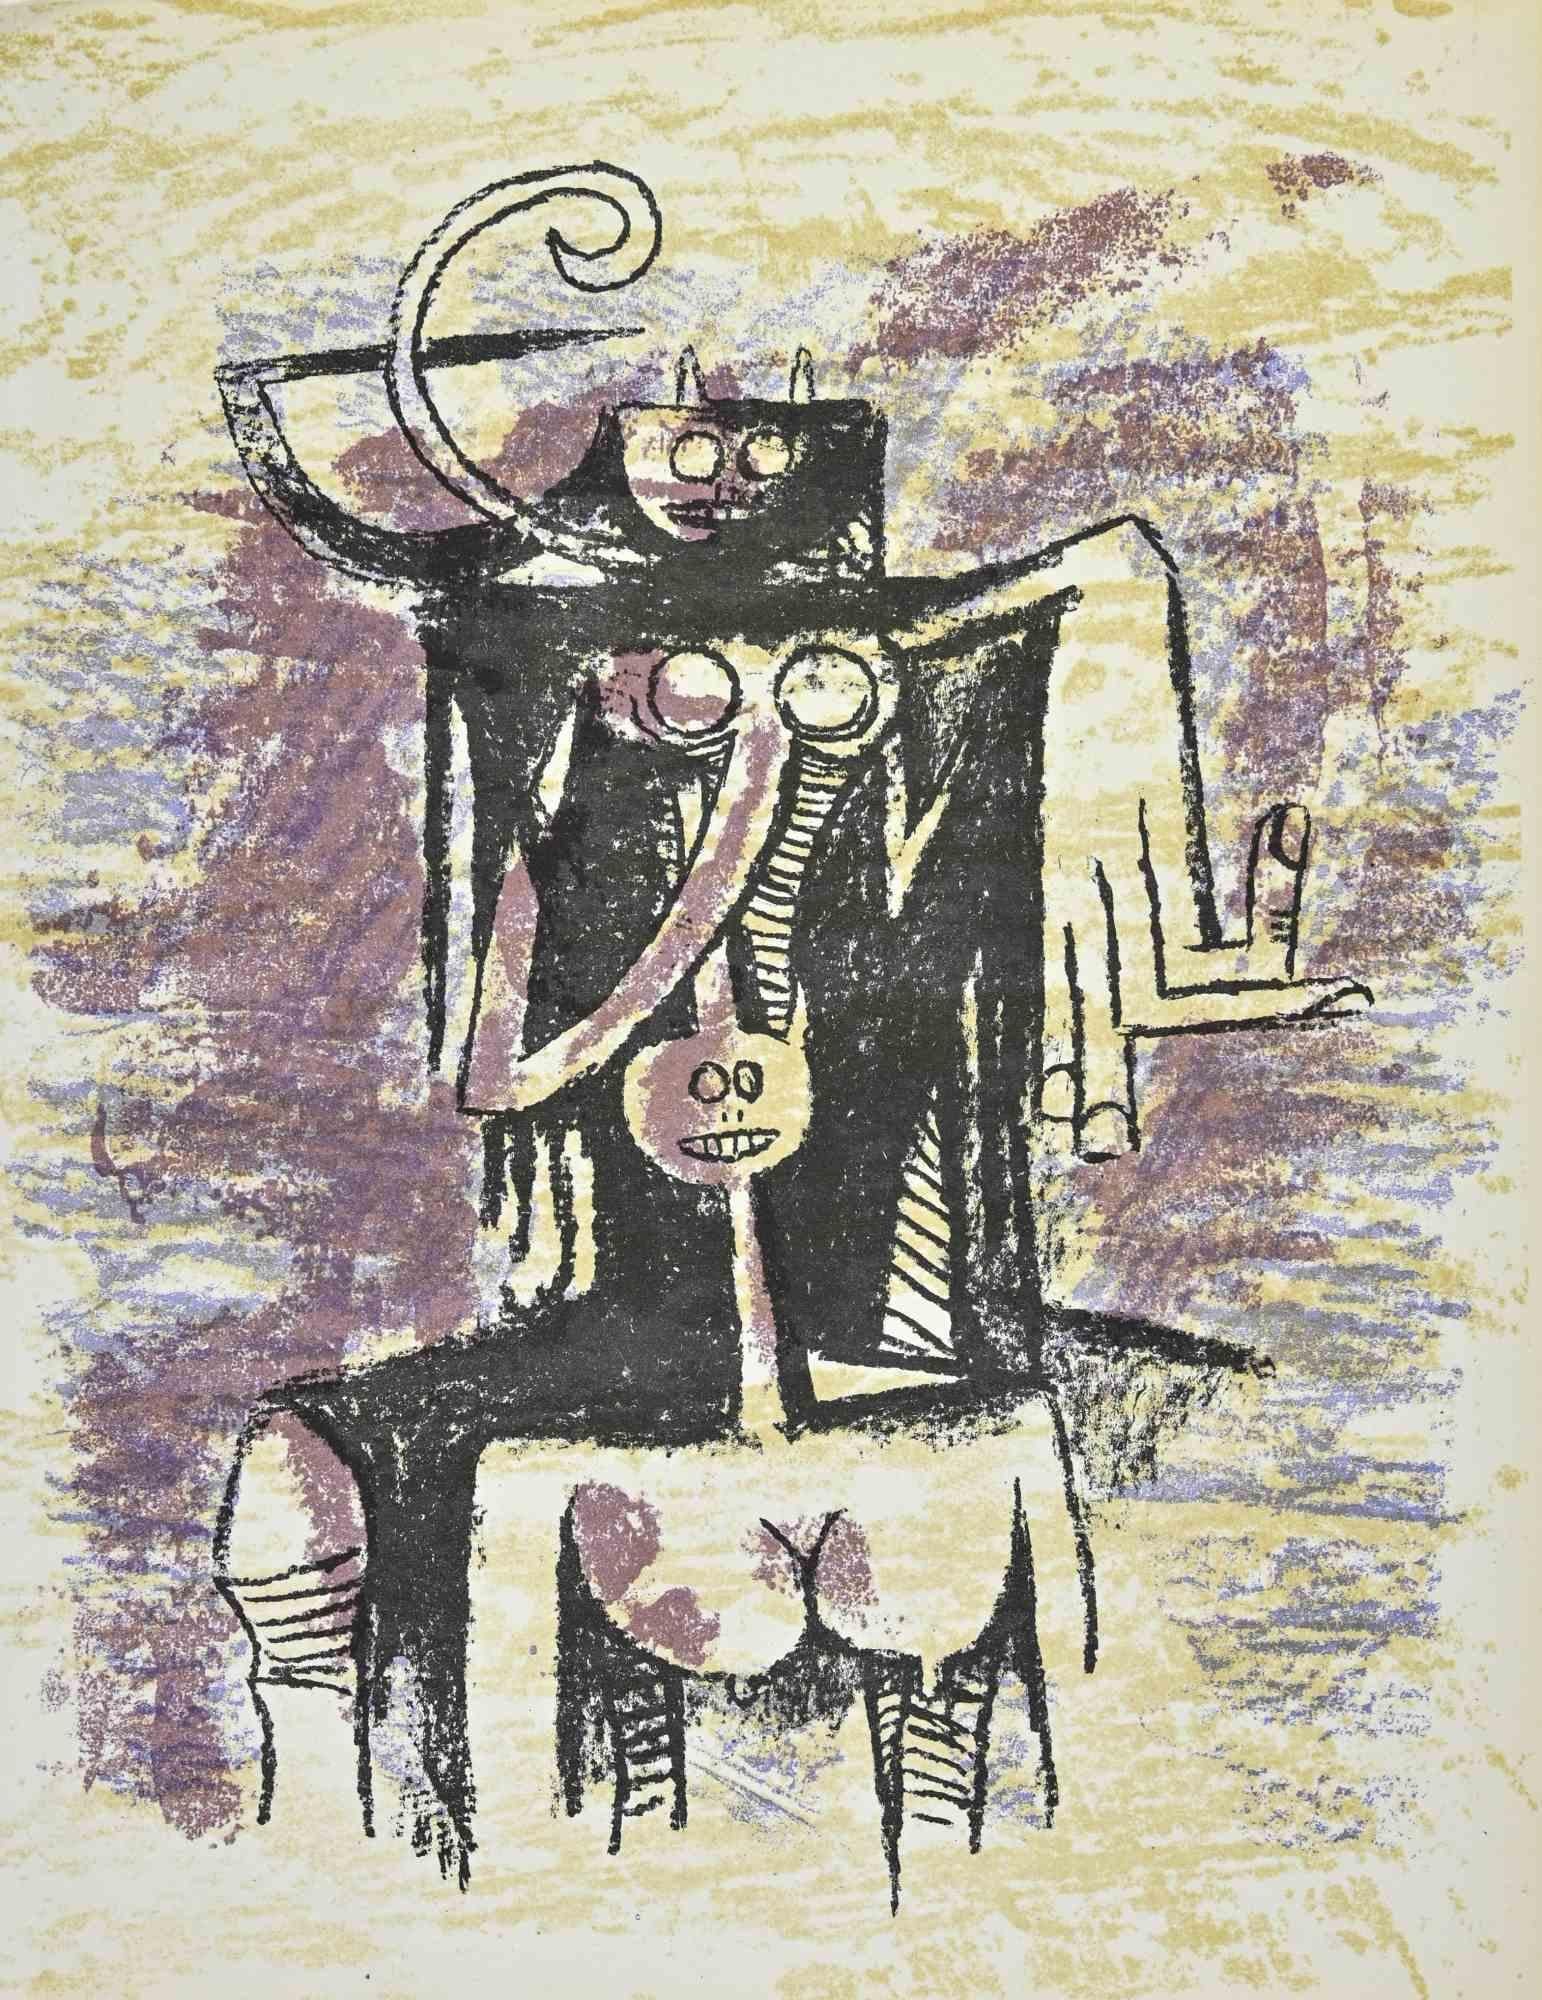 Untitled  is a lithograph realized by the Cuban Surrealist artist Wifredo Lam (1902-1982).

This is a color lithograph on wove paper, properly edited by the French magazine XXe Siécle , and published on the Panorama 74 - Le Surréalisme II , number